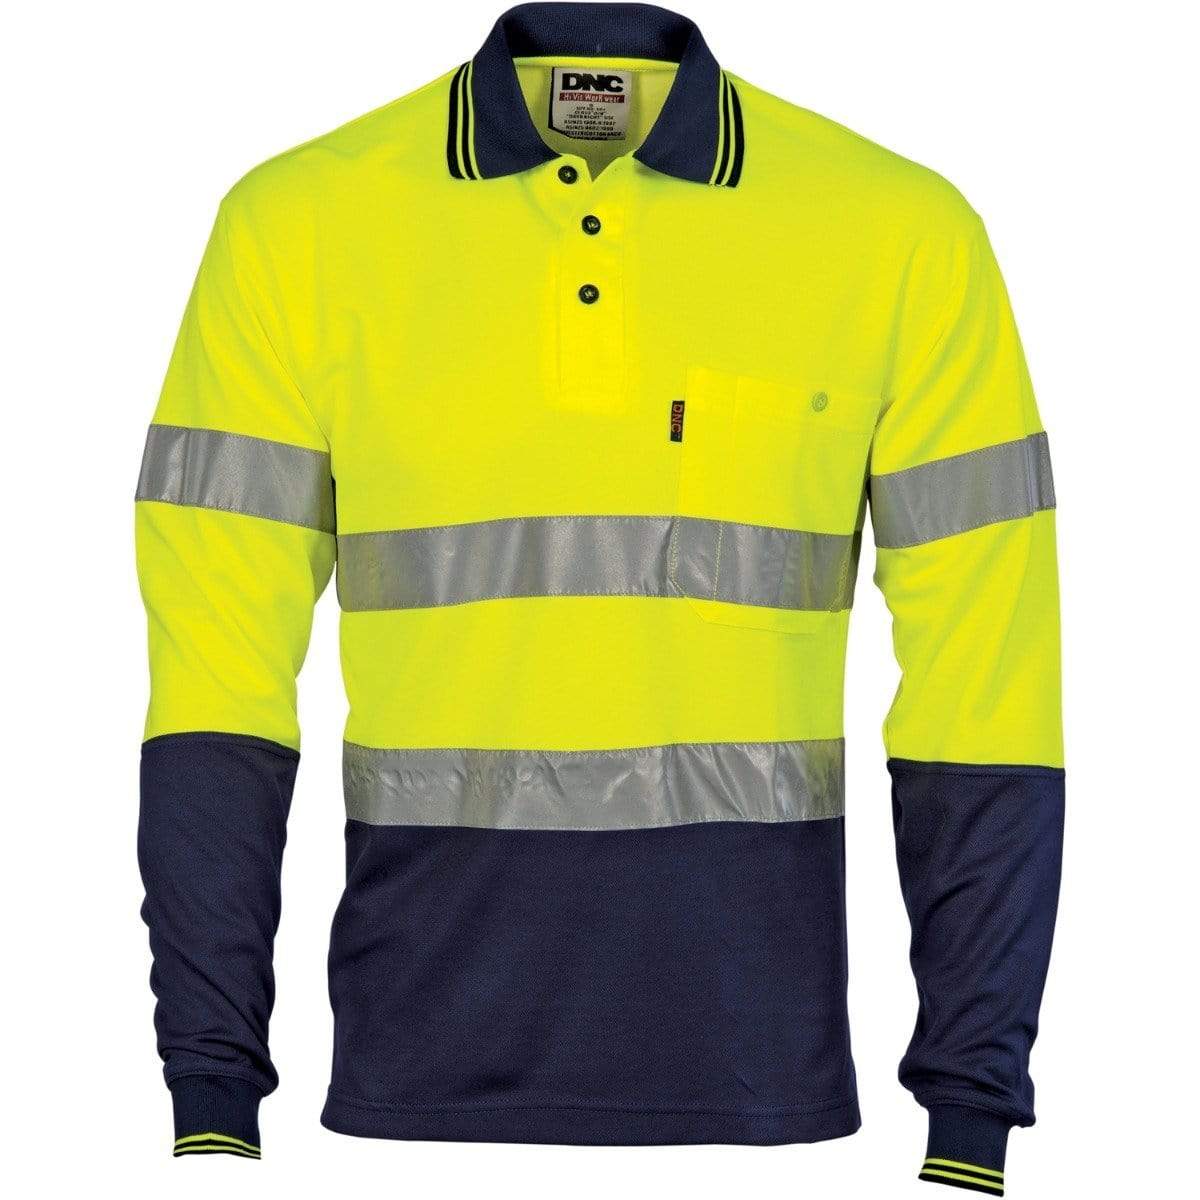 DNC Workwear Work Wear DNC WORKWEAR Hi-Vis Two Tone Cotton Back Long Sleeve Polo with Generic Reflective Tape 3718